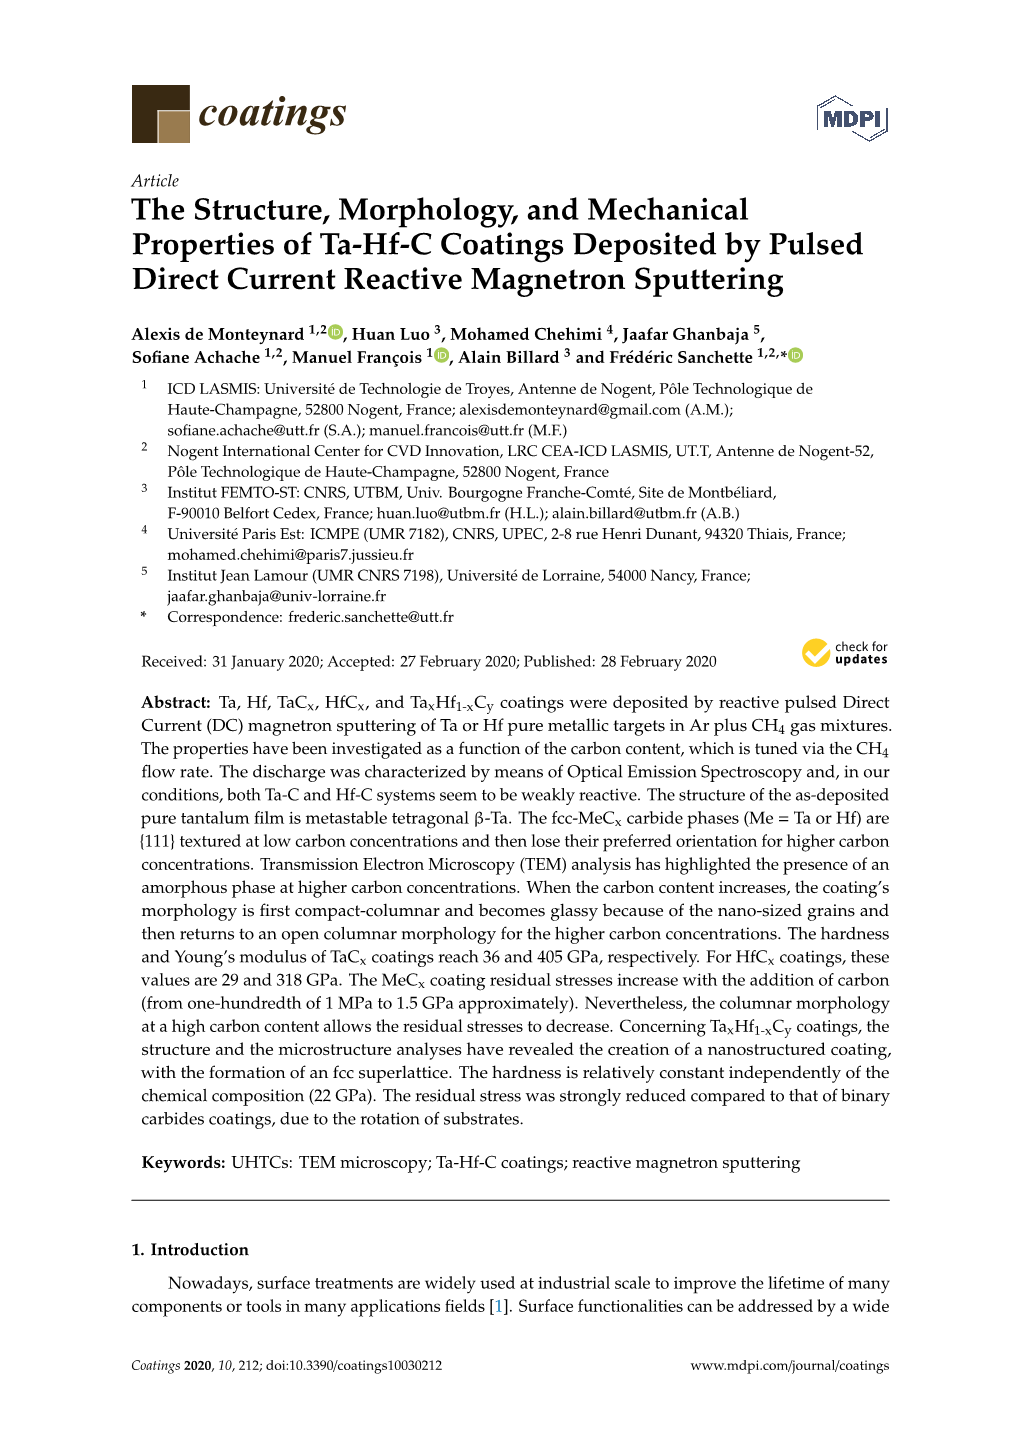 The Structure, Morphology, and Mechanical Properties of Ta-Hf-C Coatings Deposited by Pulsed Direct Current Reactive Magnetron Sputtering